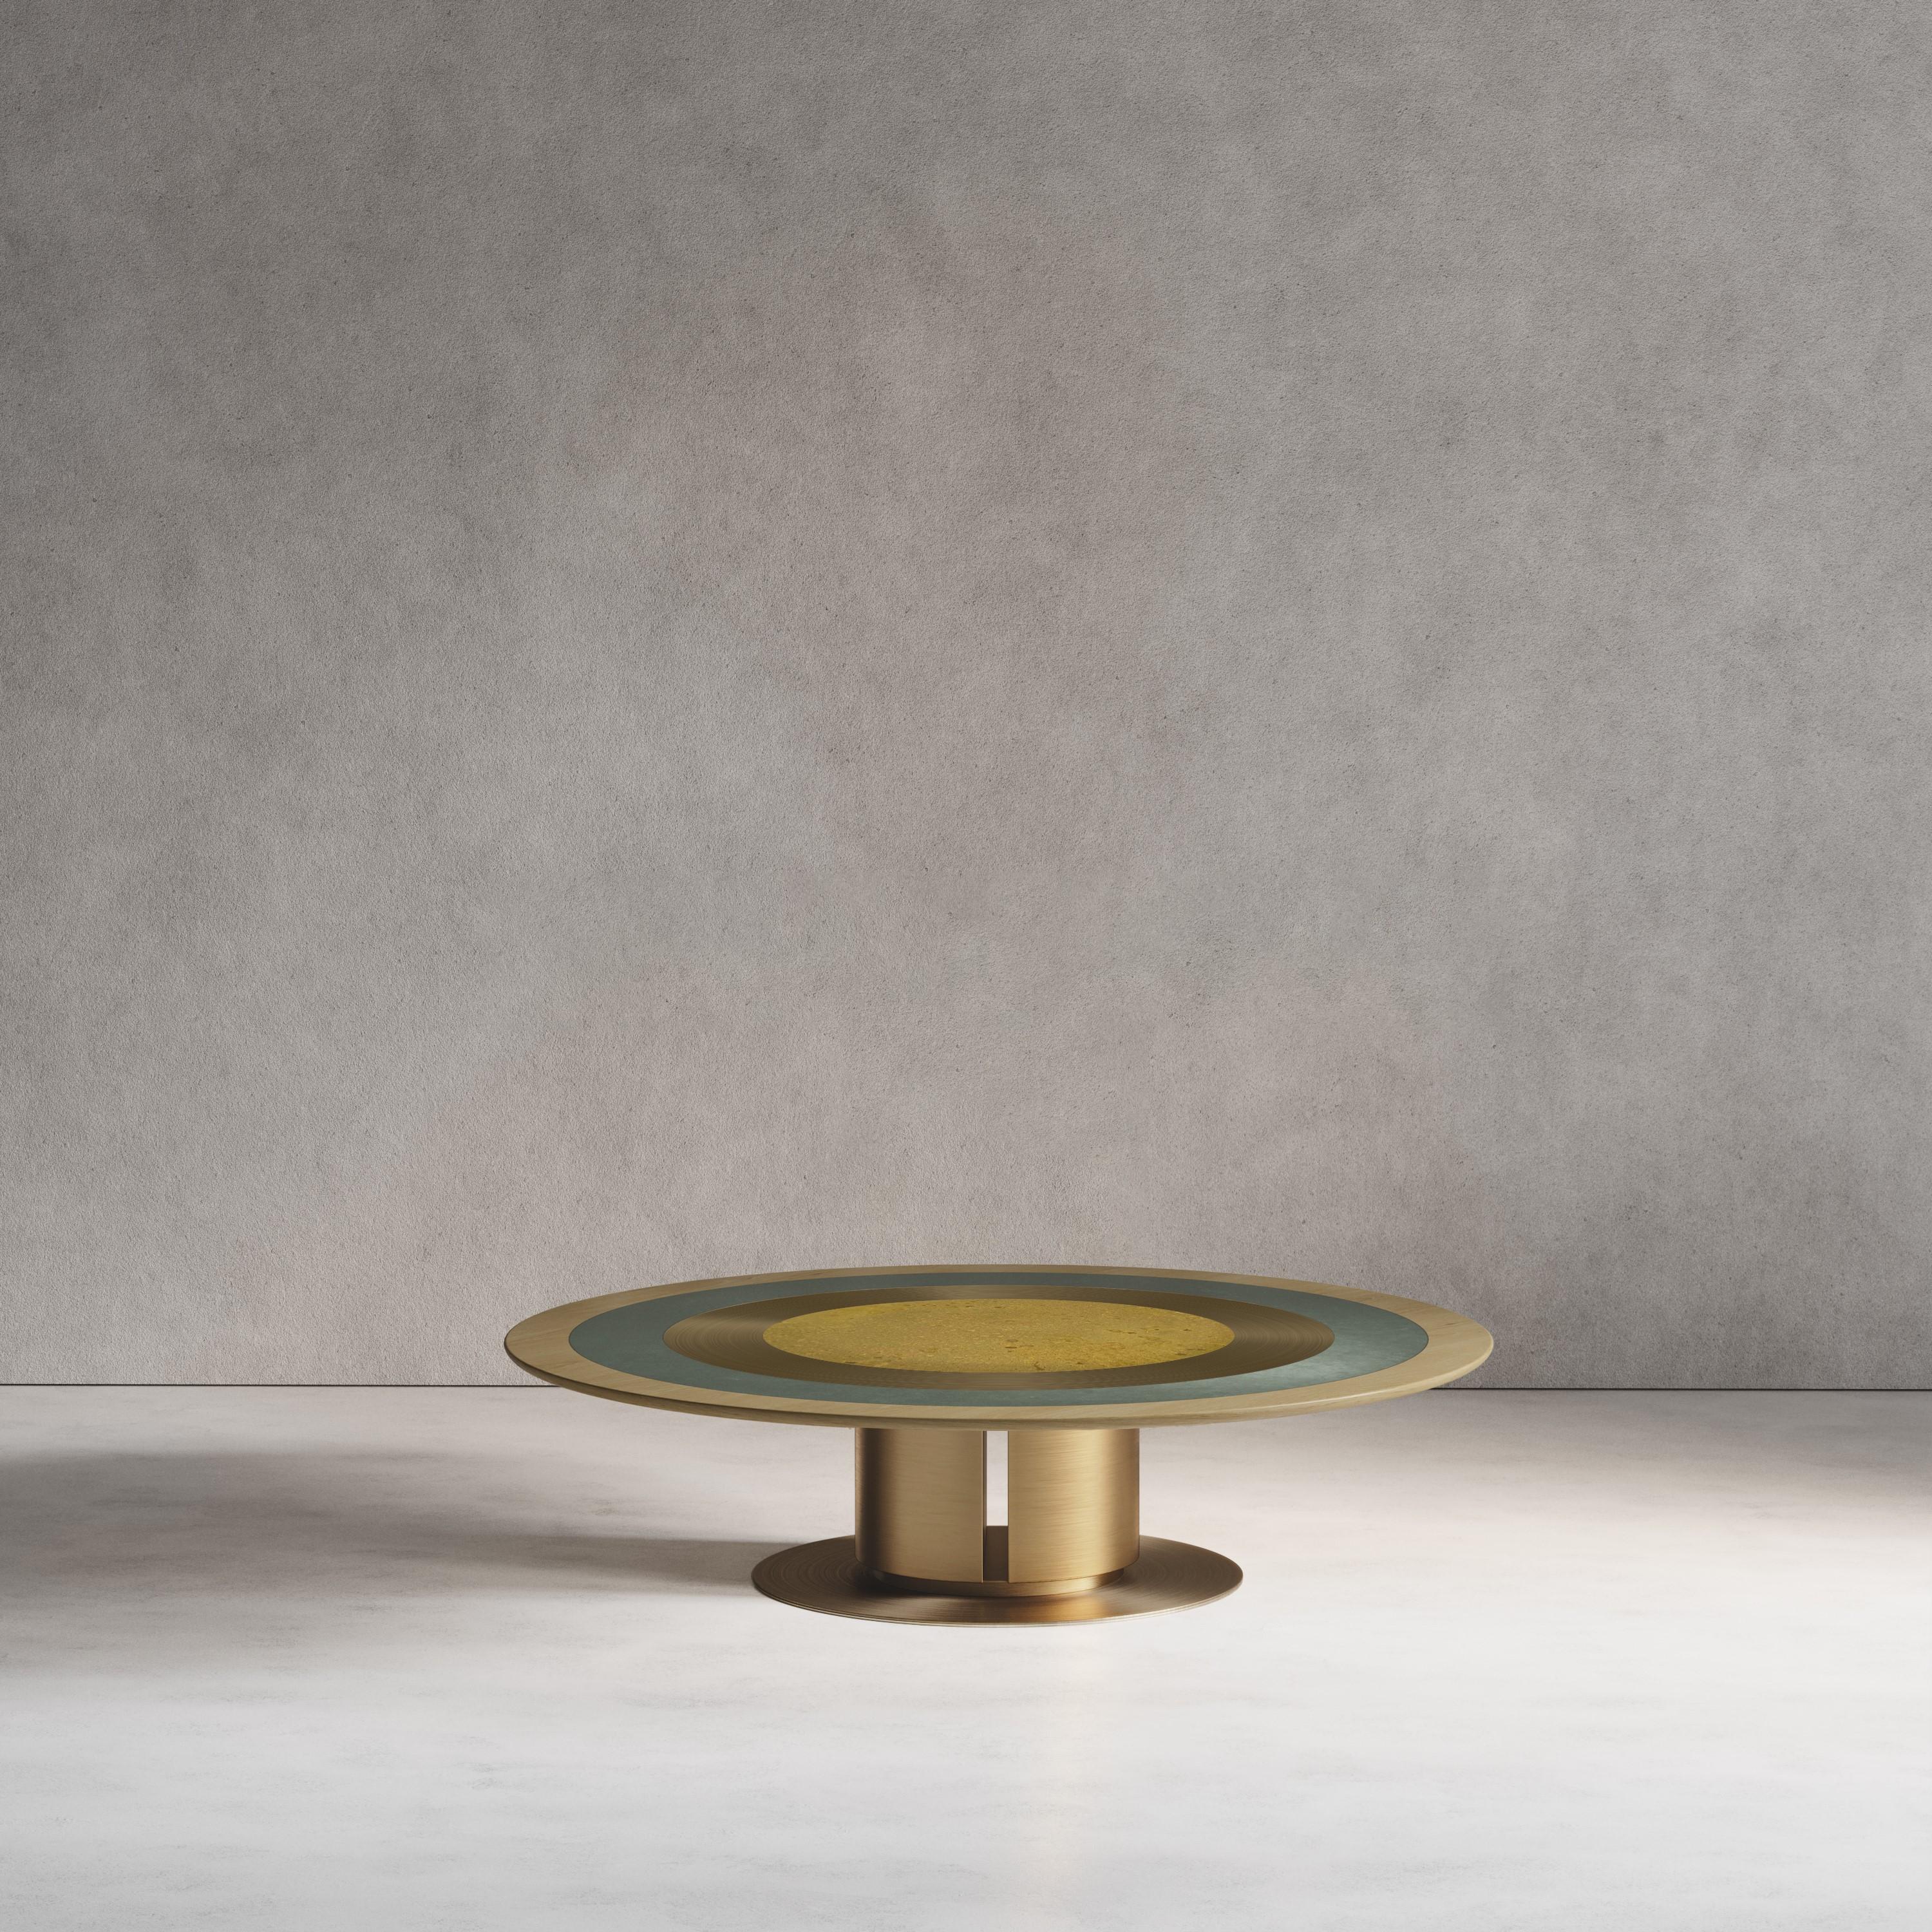 Inspired by the playfulness of a merry-go-round, the Carousel Coffee Table Aurum combines both brass, bronze, and wood. Using hand-spun brass, Solid Sycamore, Sycamore veneer, and a selection of our signature patinas, this Carousel piece plays with